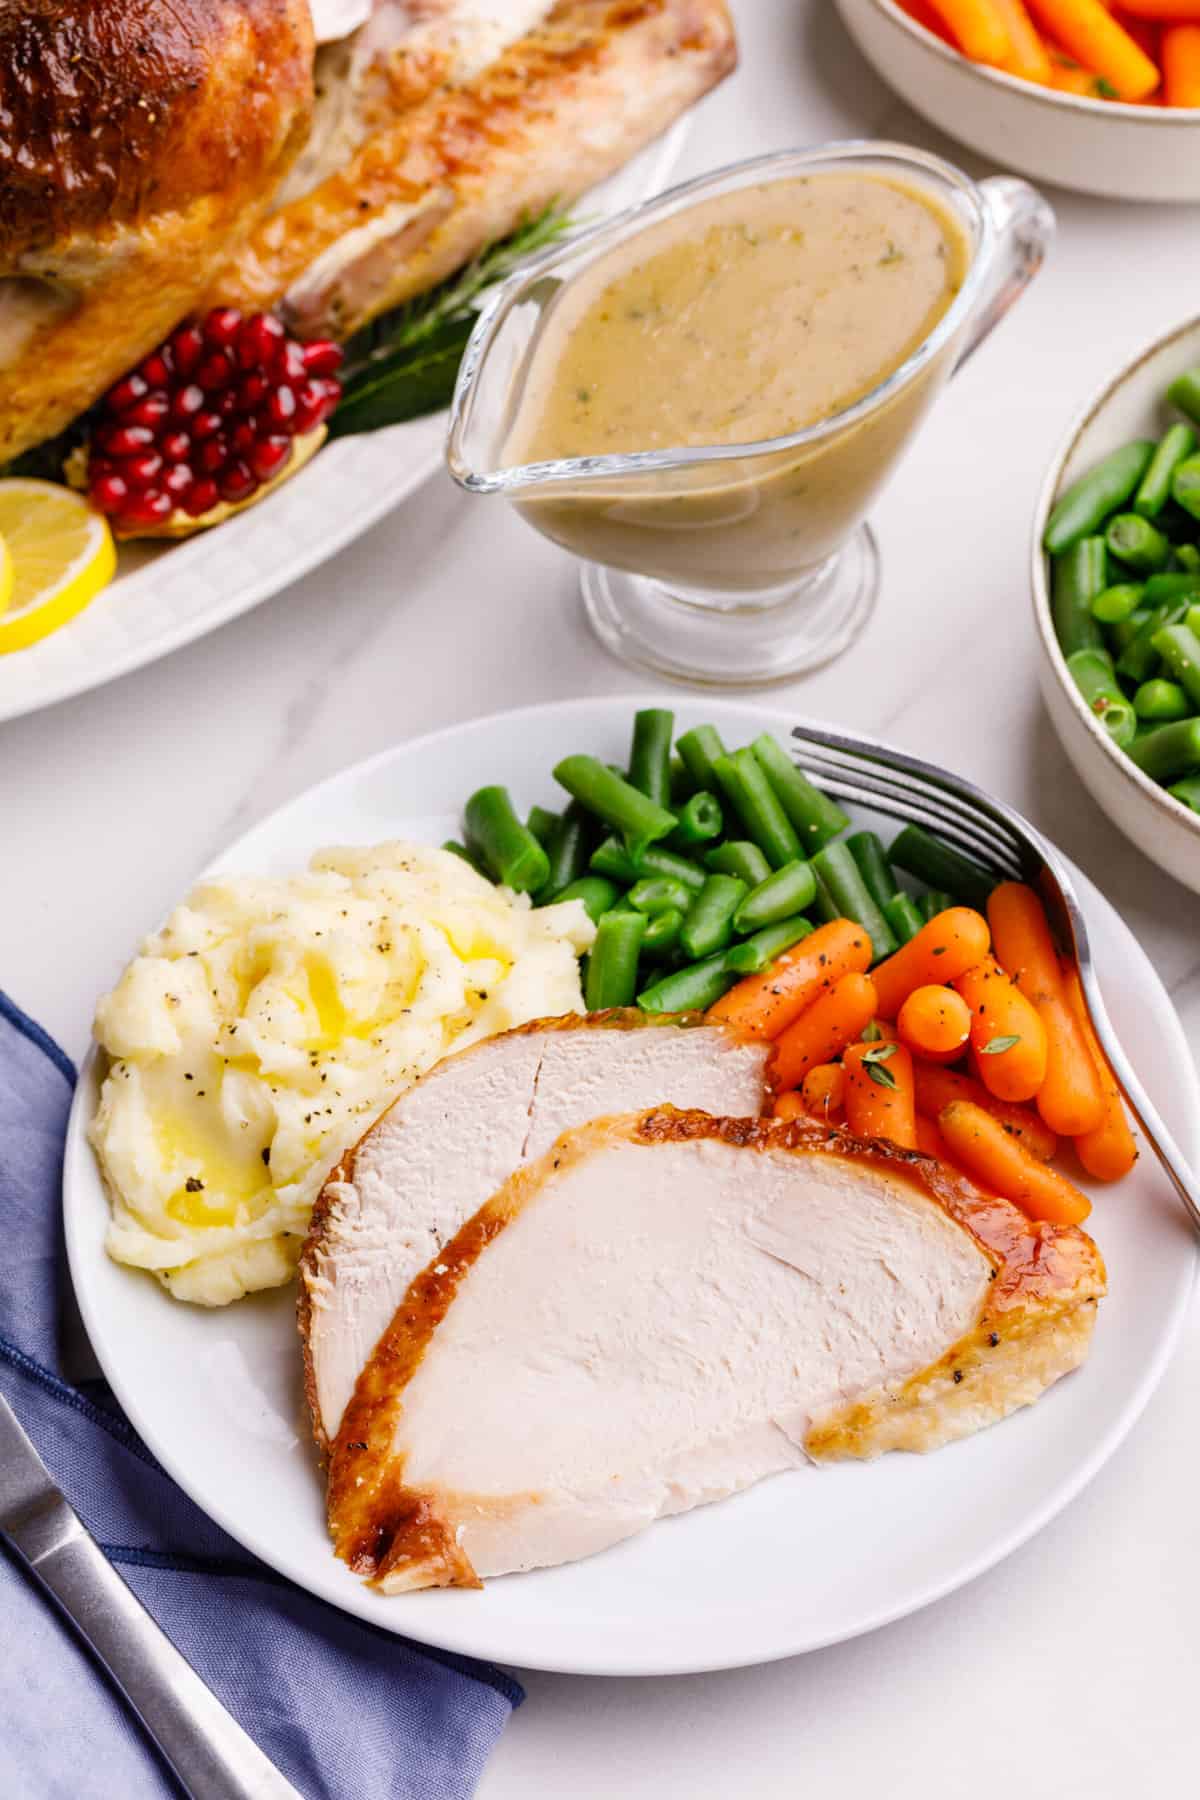 plate of two roasted turkey servings, carrots, green beans and mashed potatoes on the side all served on a white round plate